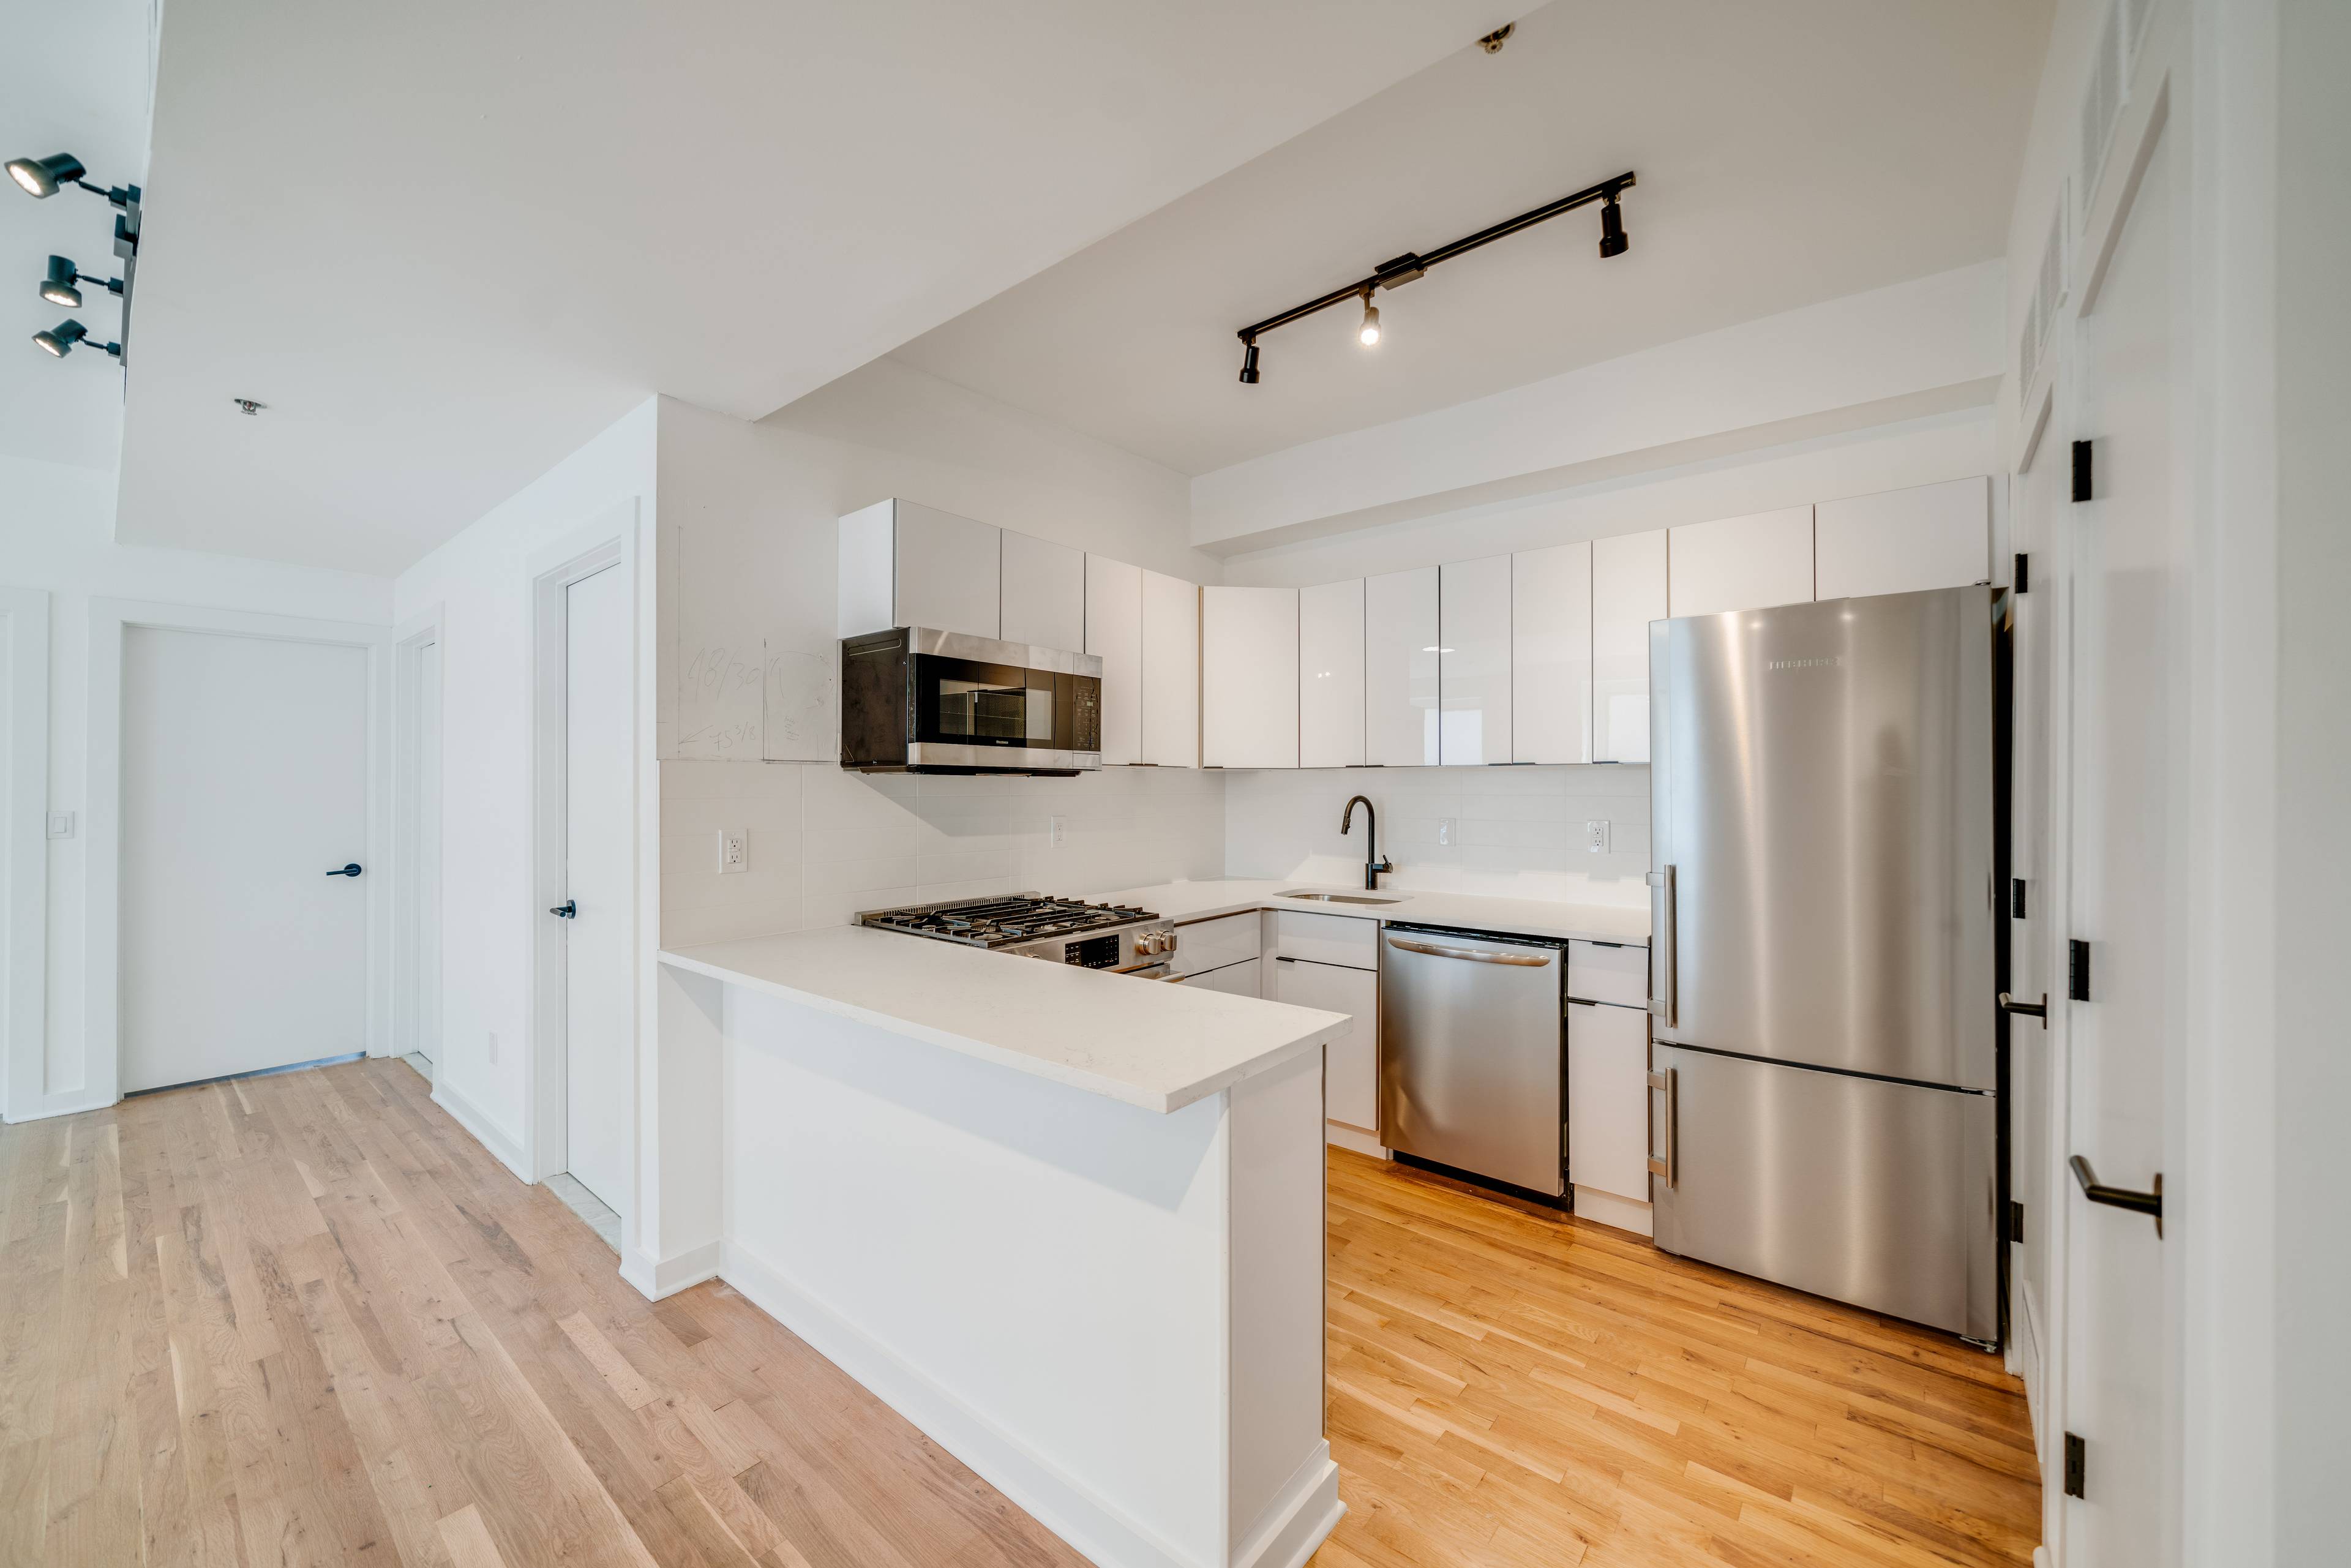 Unit 202 at 716 Madison Street! Brand New Renovation.  Laundry in Unit!  Central AC & Heating.